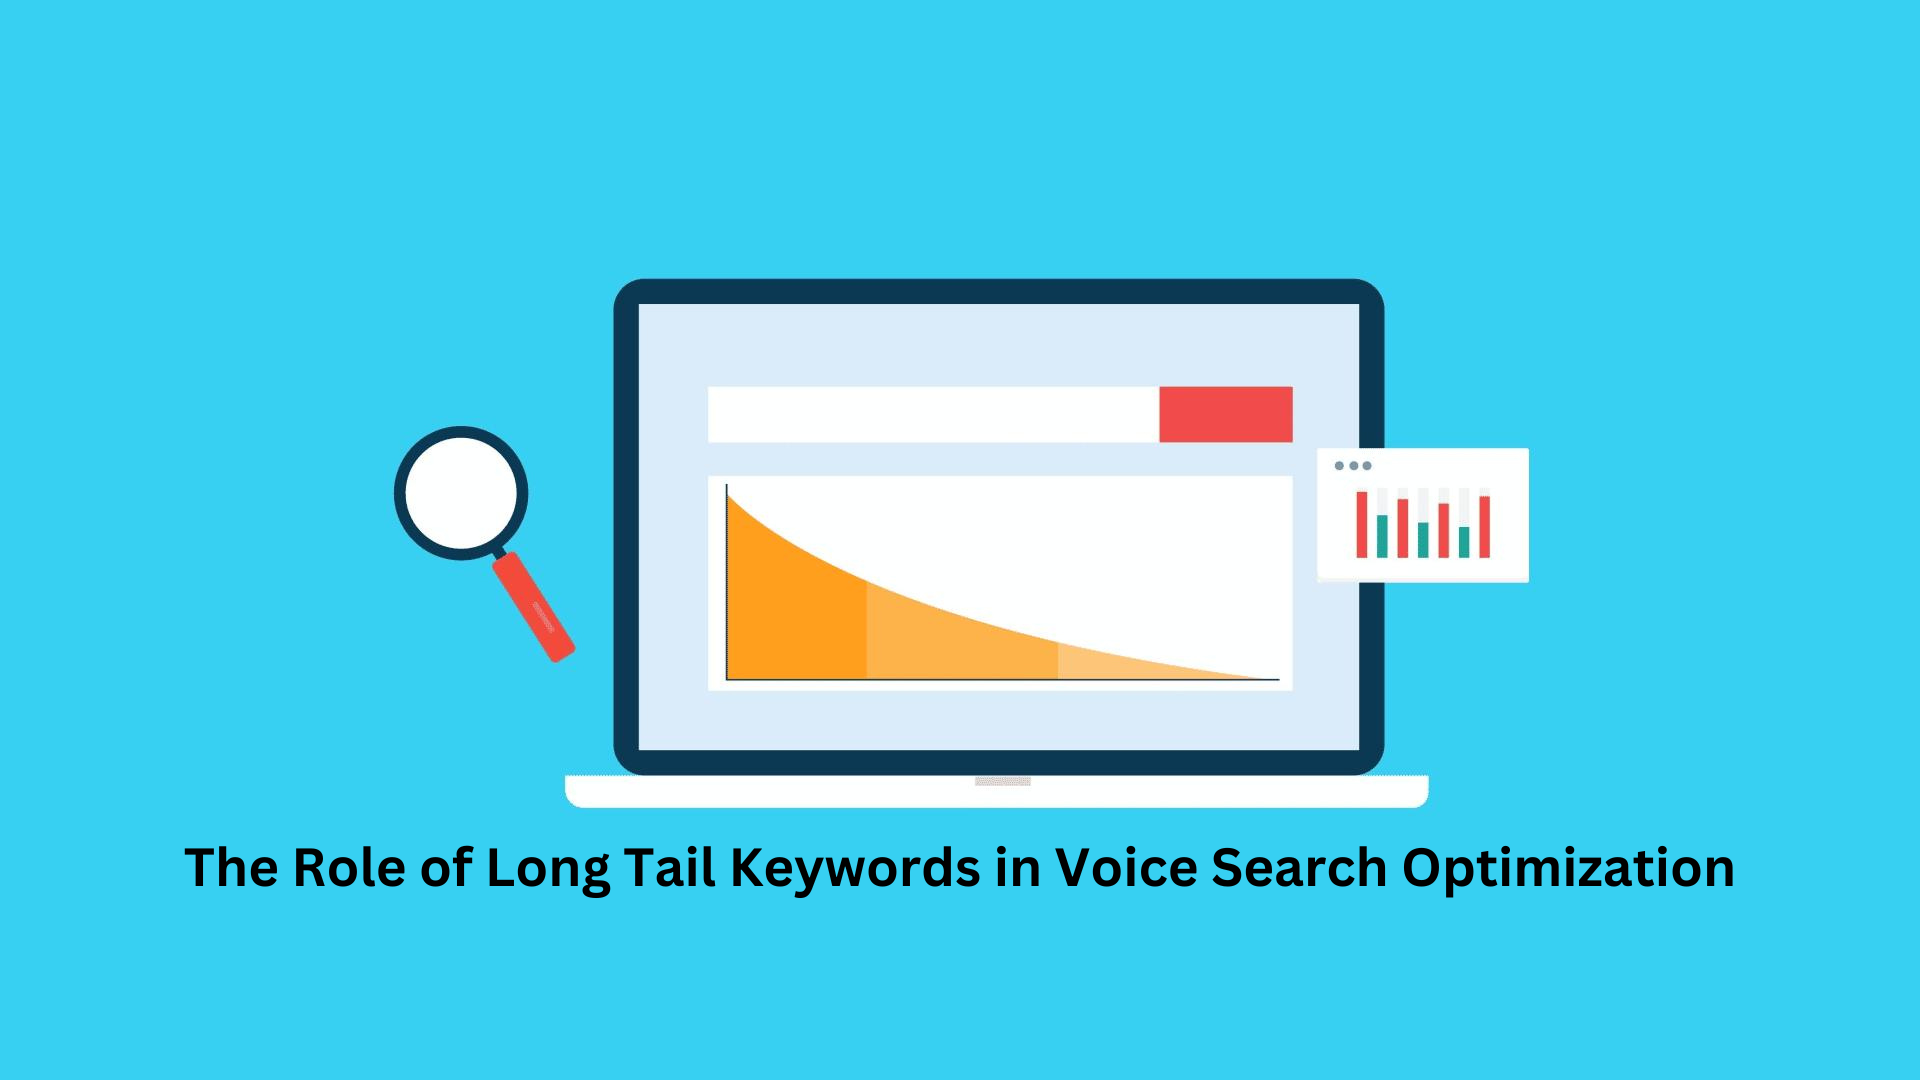 The Role of Long Tail Keywords in Voice Search Optimization